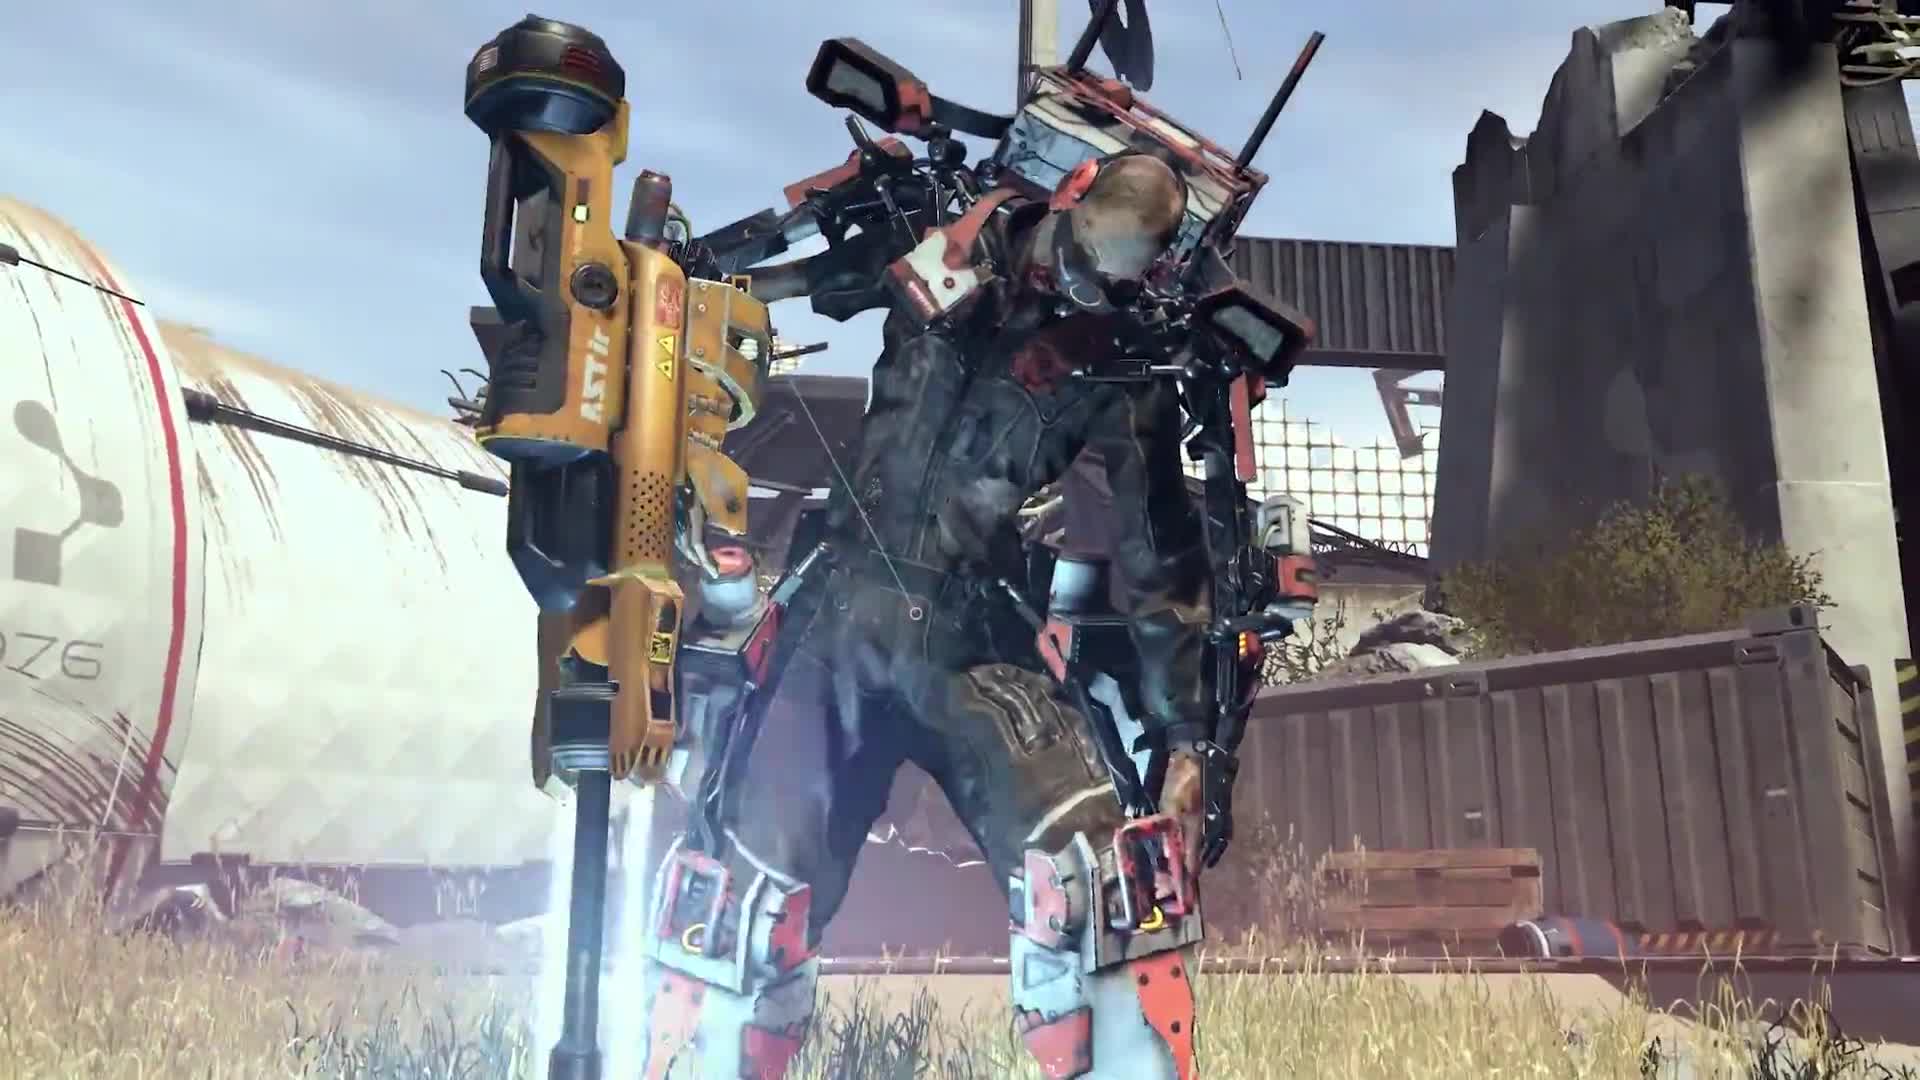 The Surge - Target, Loot and Equip Trailer